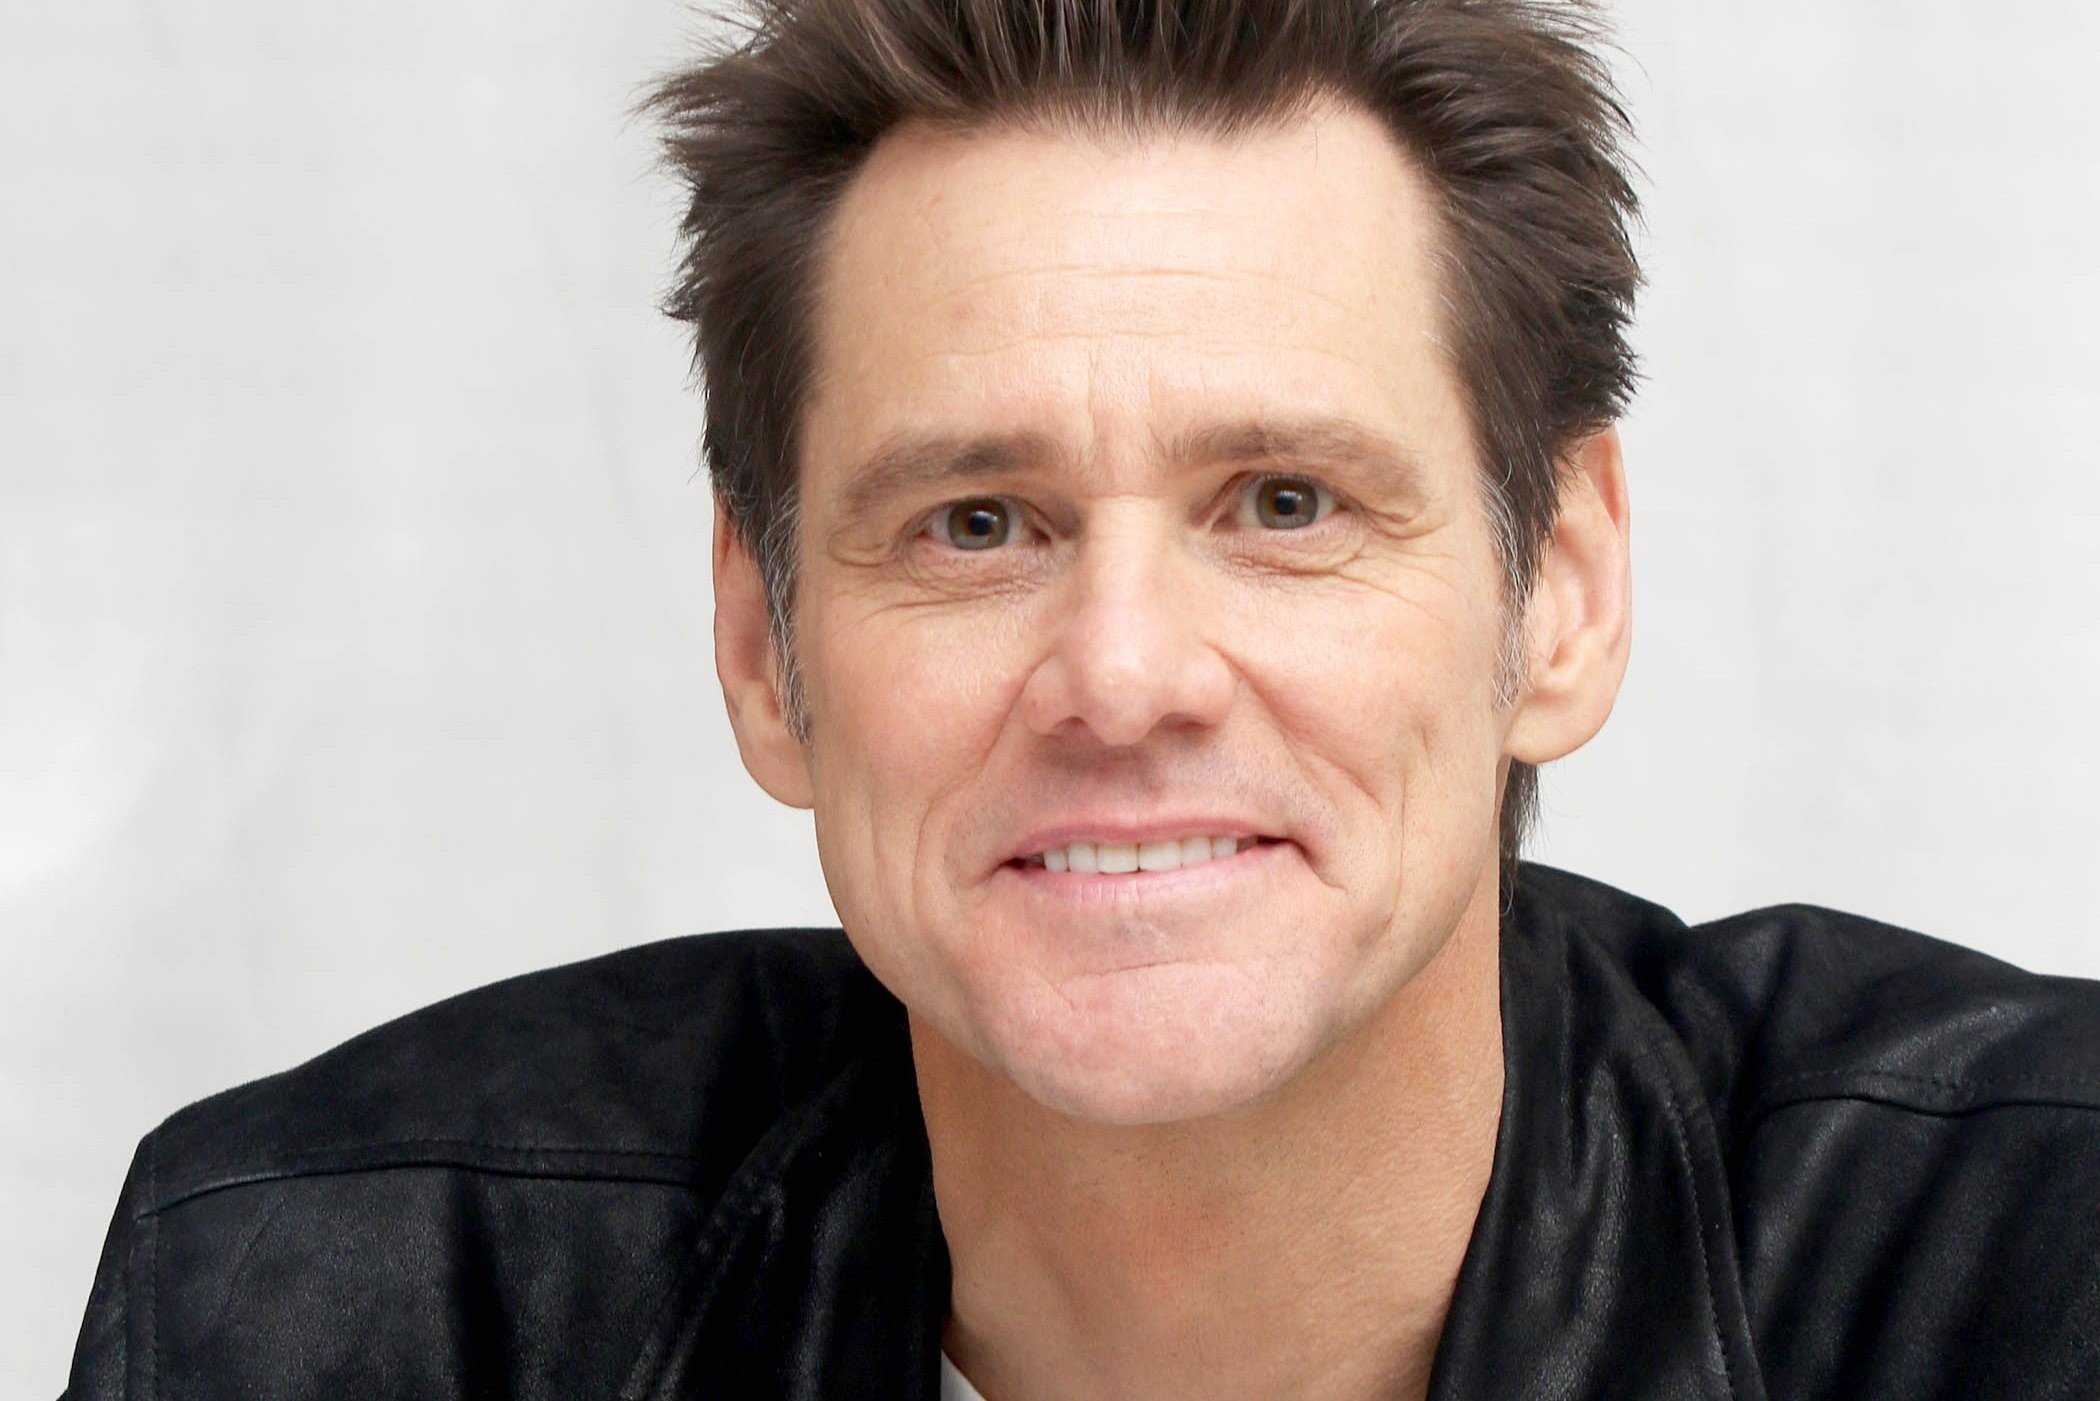 ‘I’m burning myself to the ground’: Jim Carrey's Battle with Hollywood, Art, and Authenticity